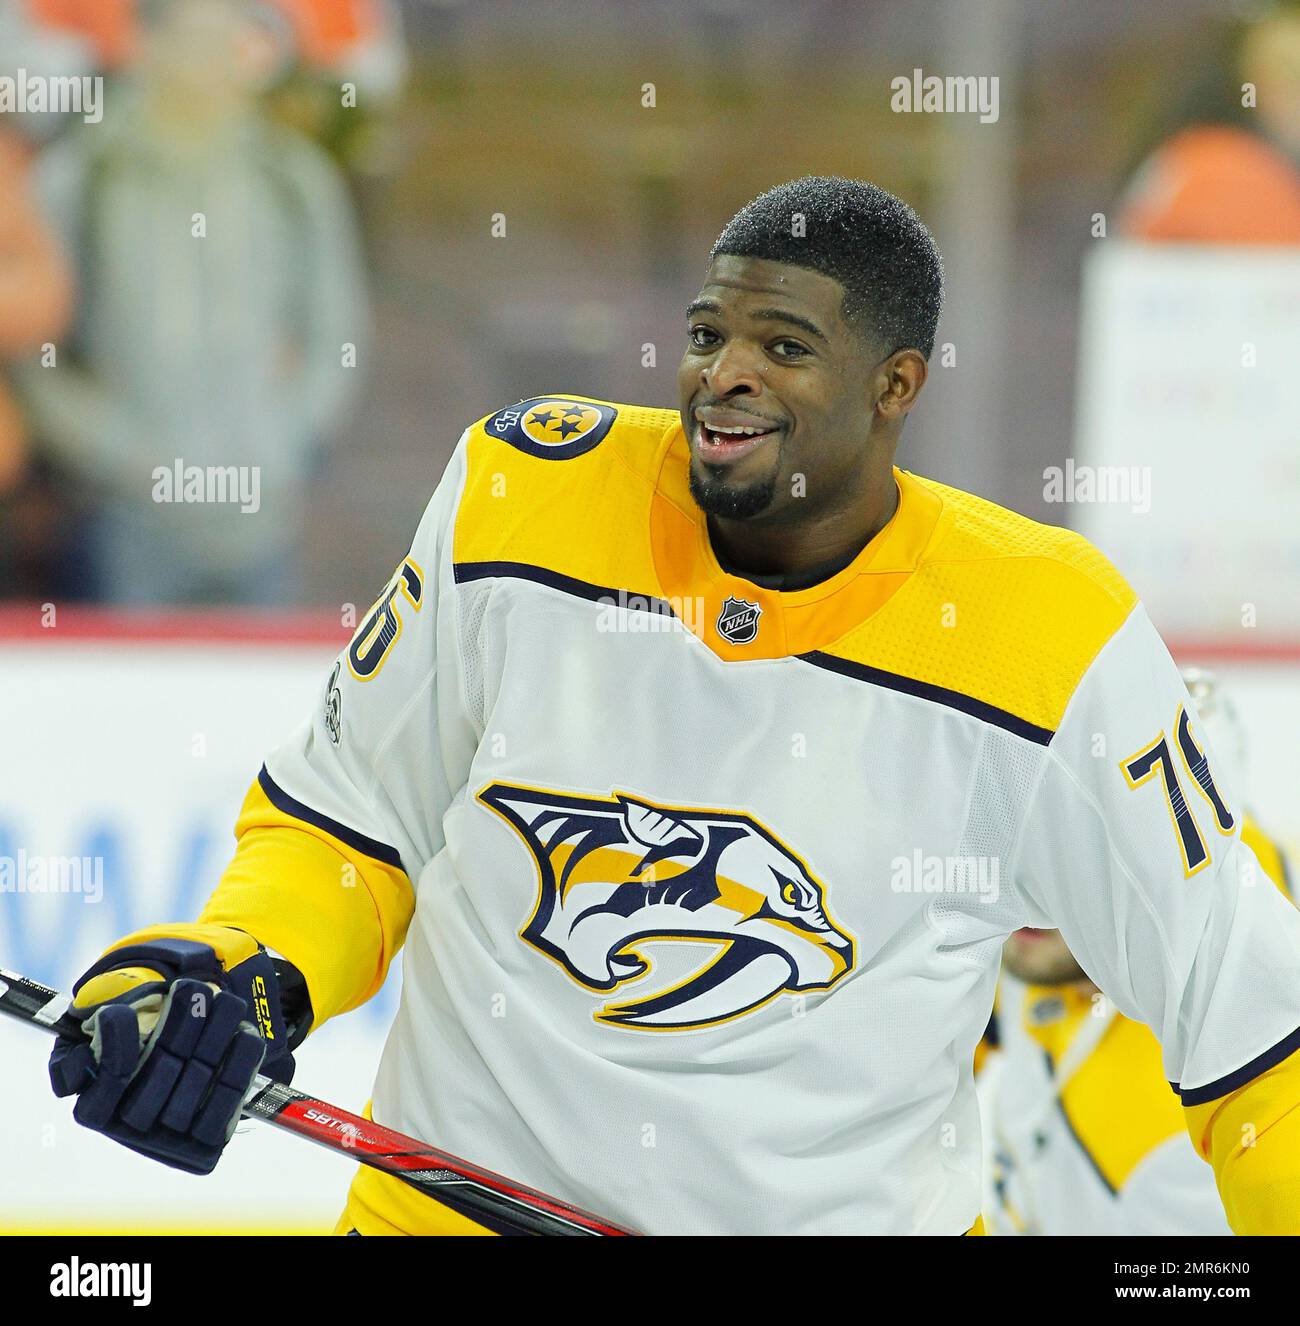 P.K. Subban goes Hollywood and the marketing of NHL stars